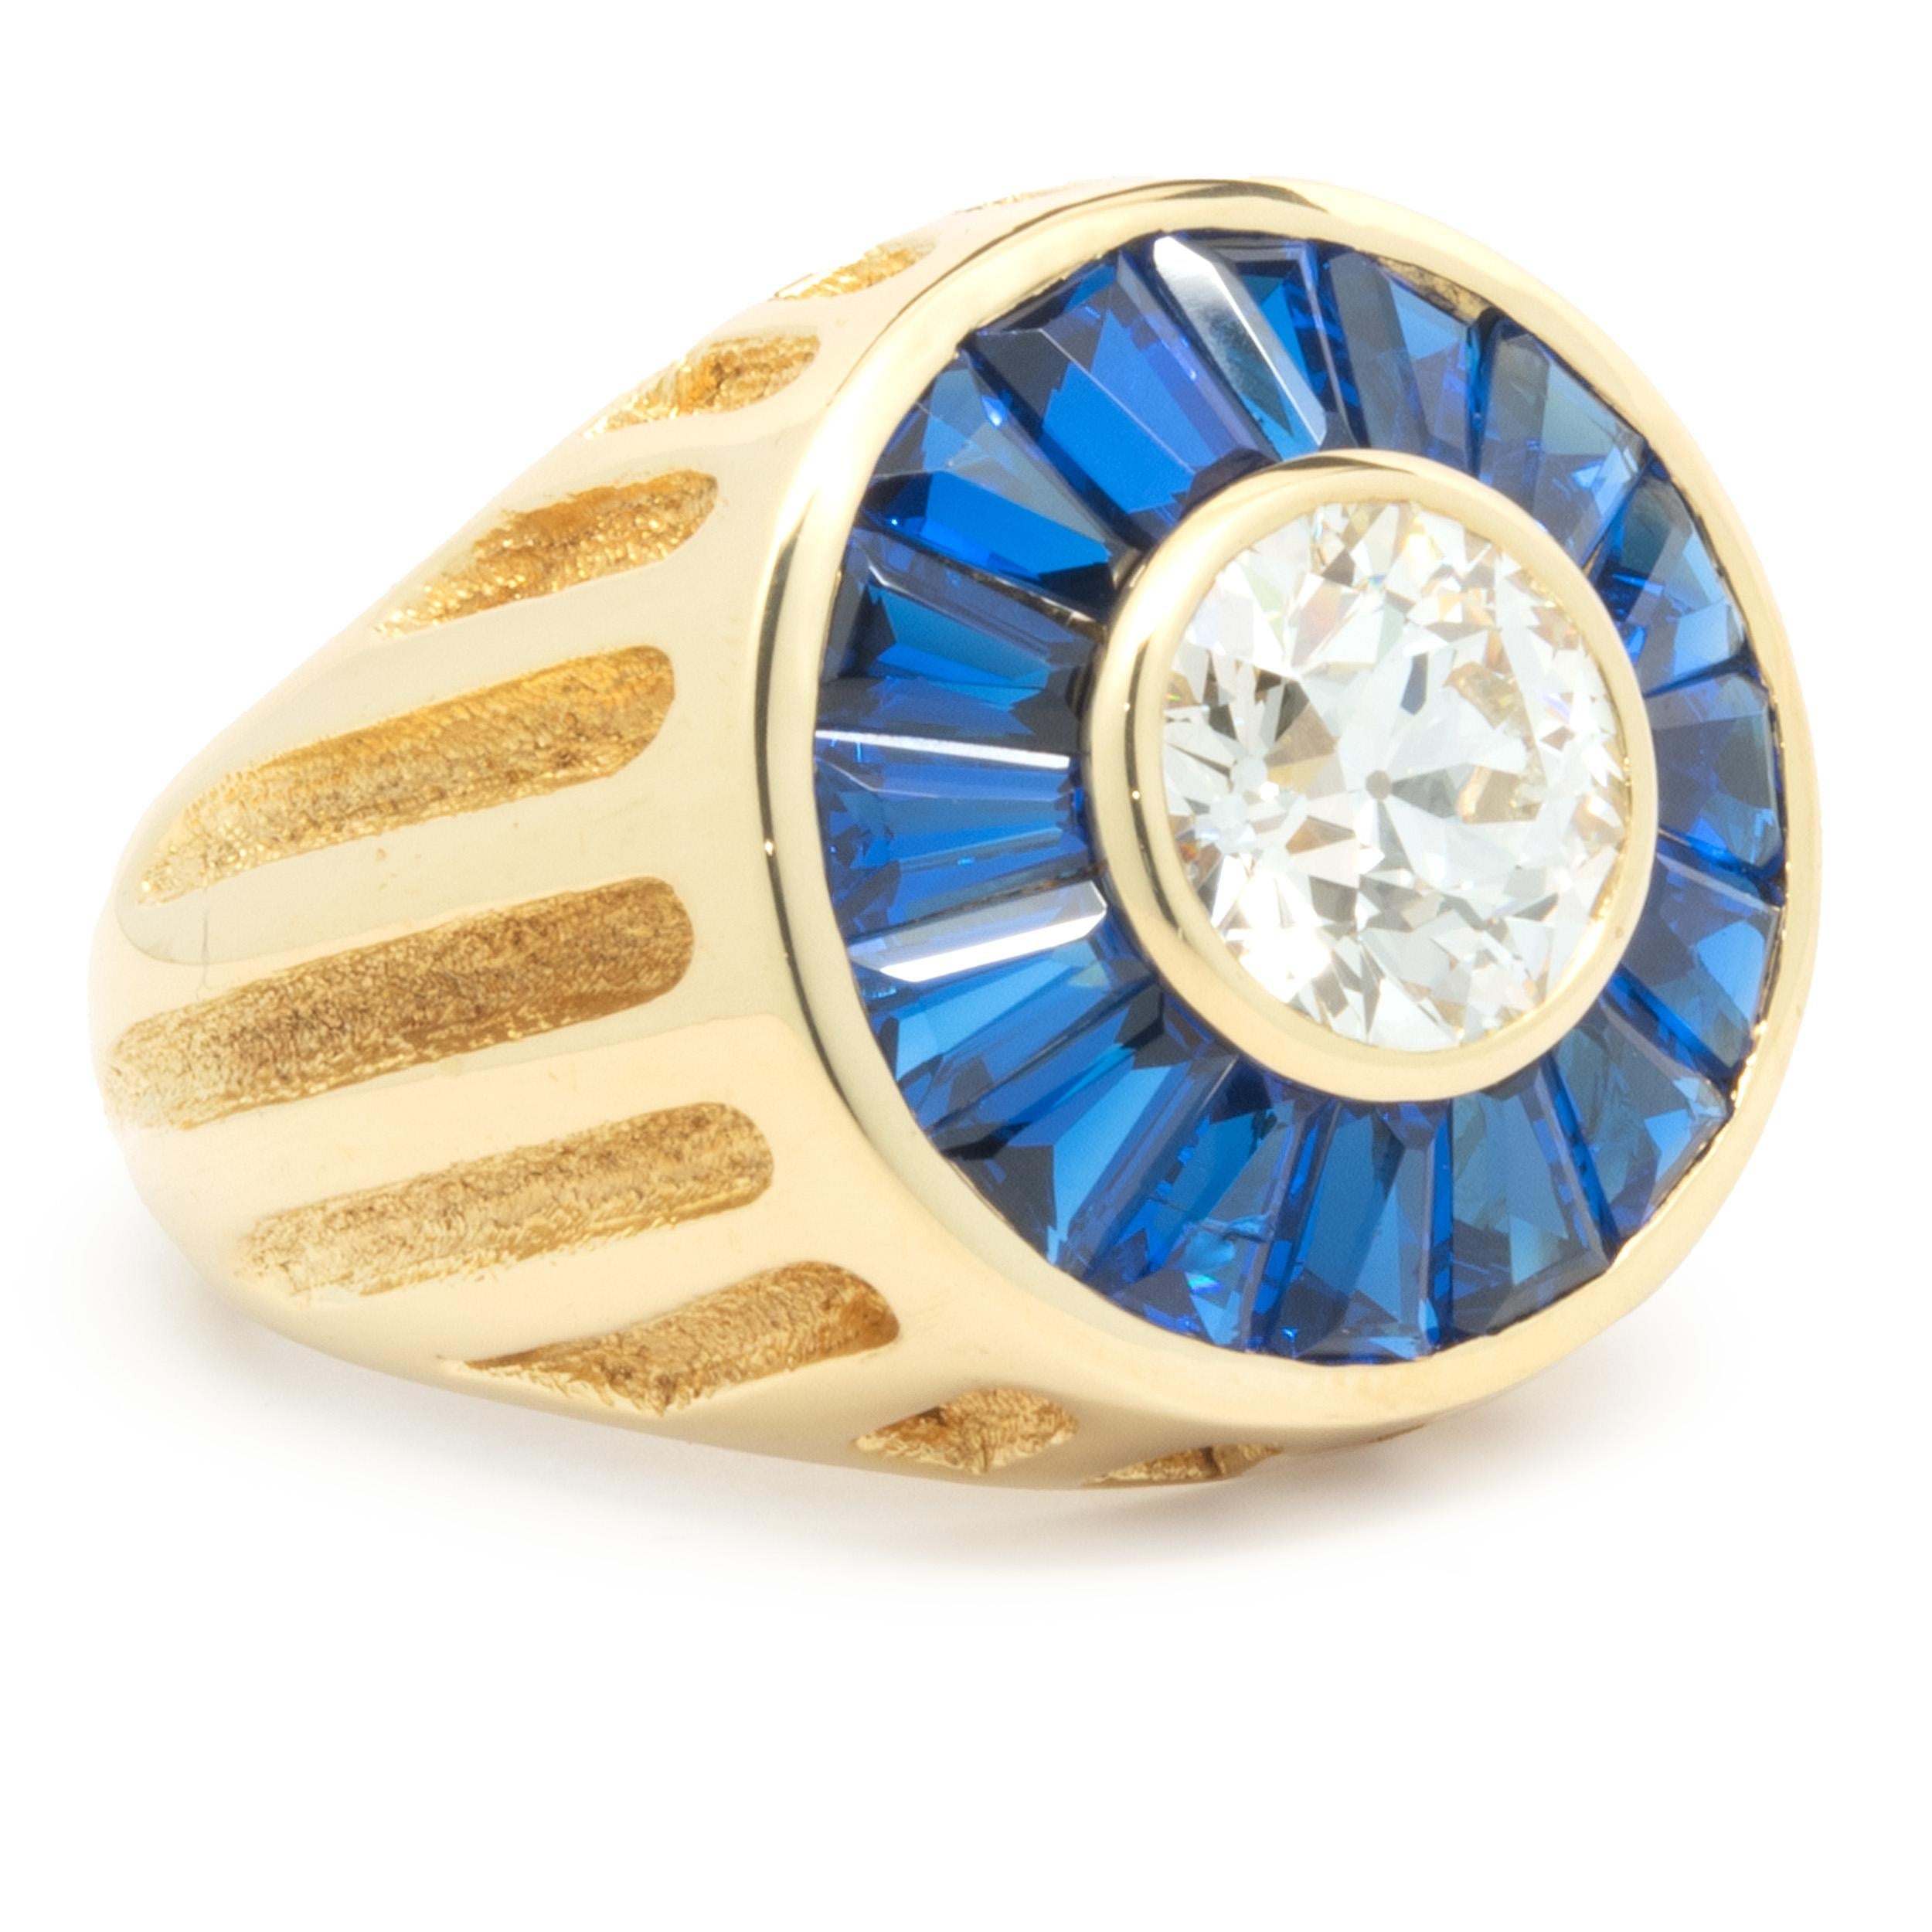 Designer: custom design
Material: 18K yellow gold
Diamond: 1 round European cut = 4.50ct
Color: K
Clarity: VS1
Dimensions: ring top measures 25mm wide
Ring Size: 14.5 (please allow two extra shipping days for sizing requests) 
Weight: 41.20 grams